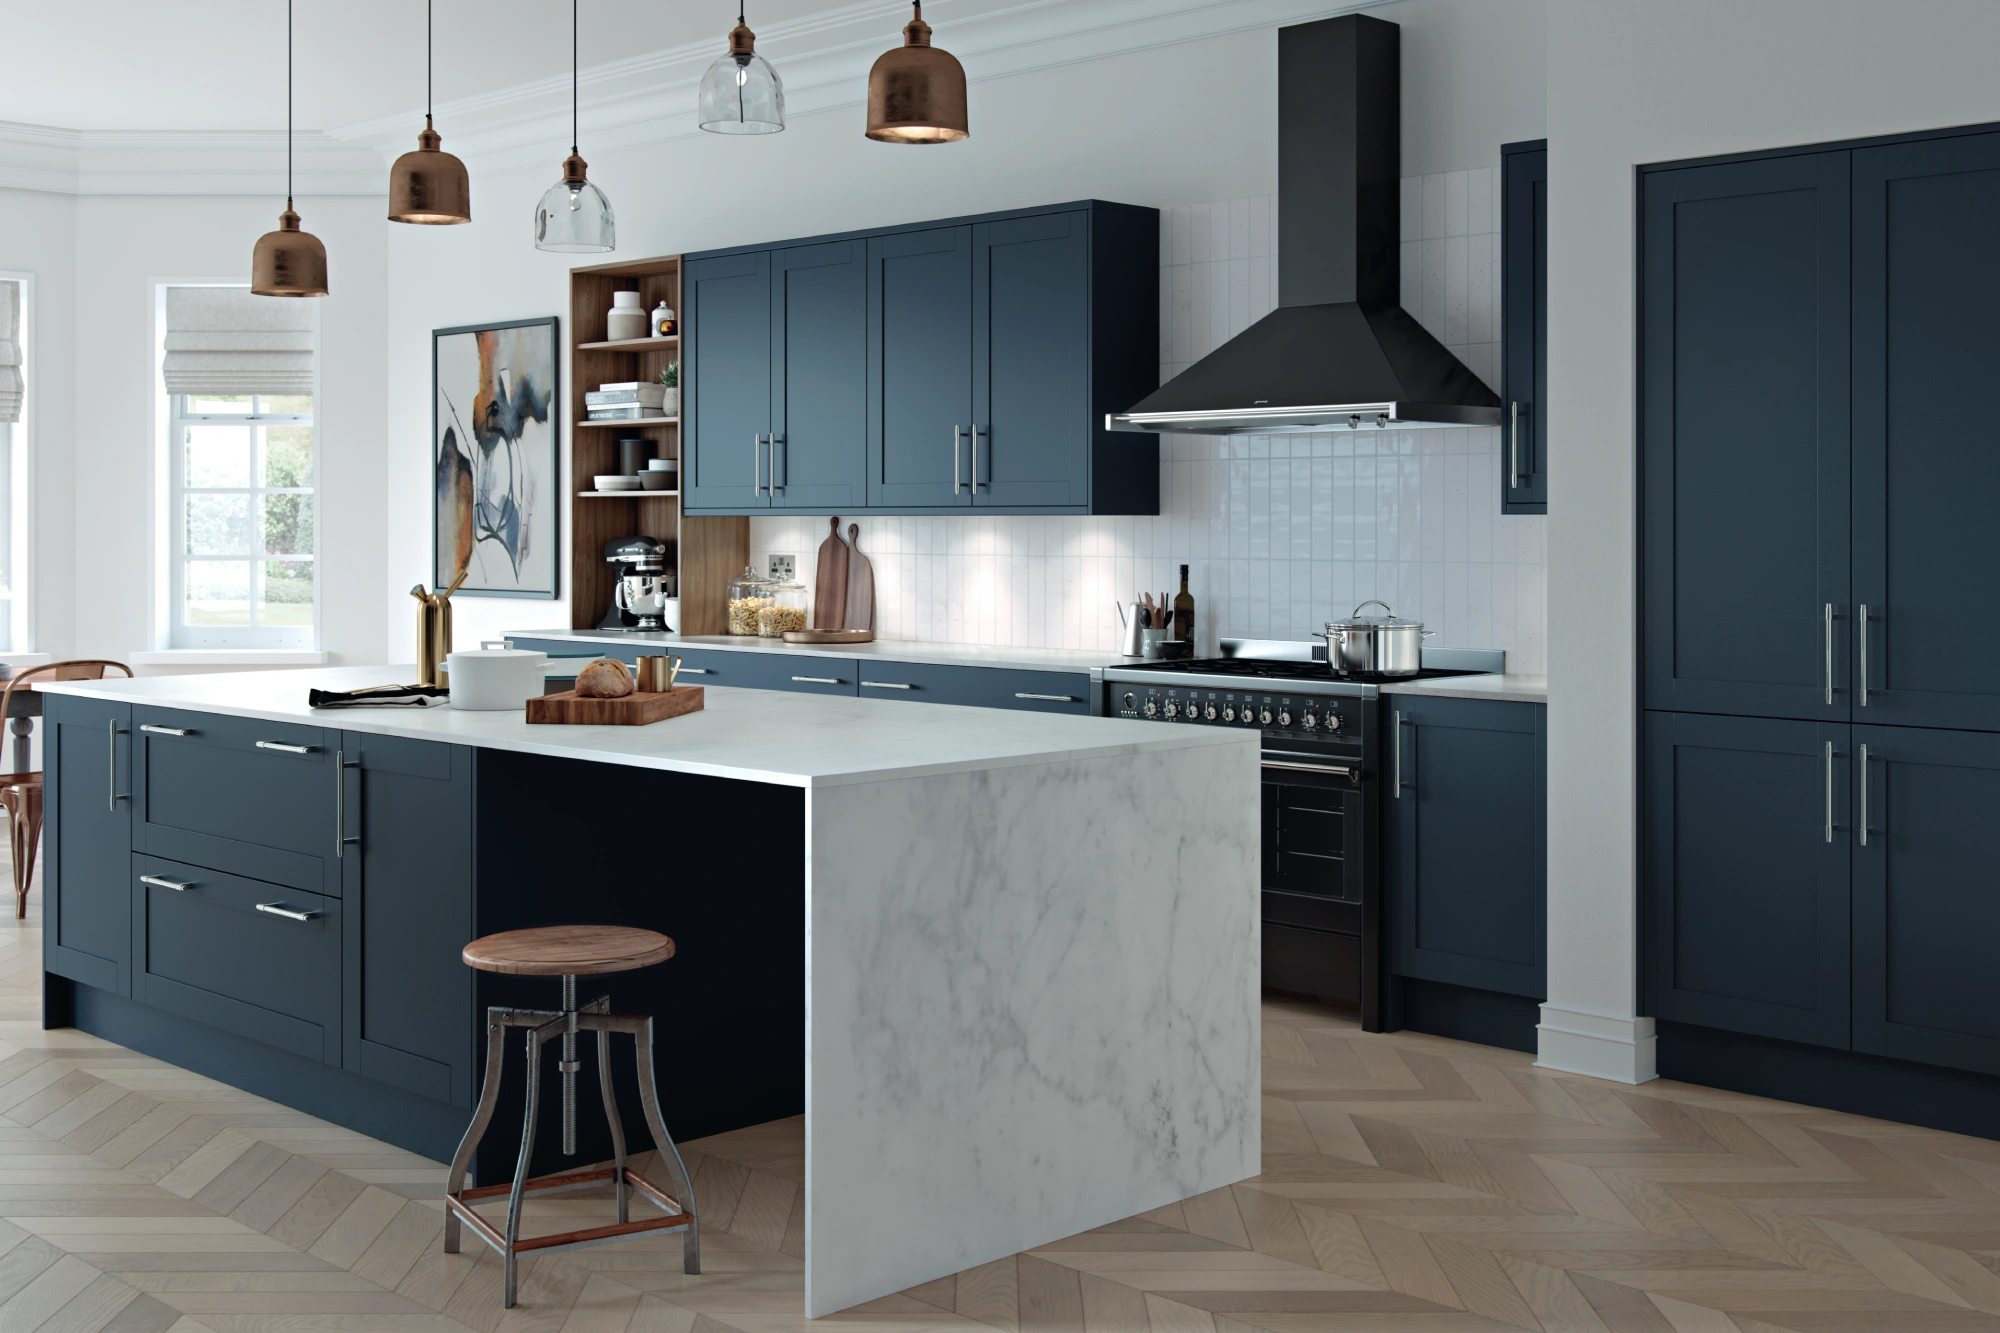 Our Guide To Minimalist Kitchen Design surfaces